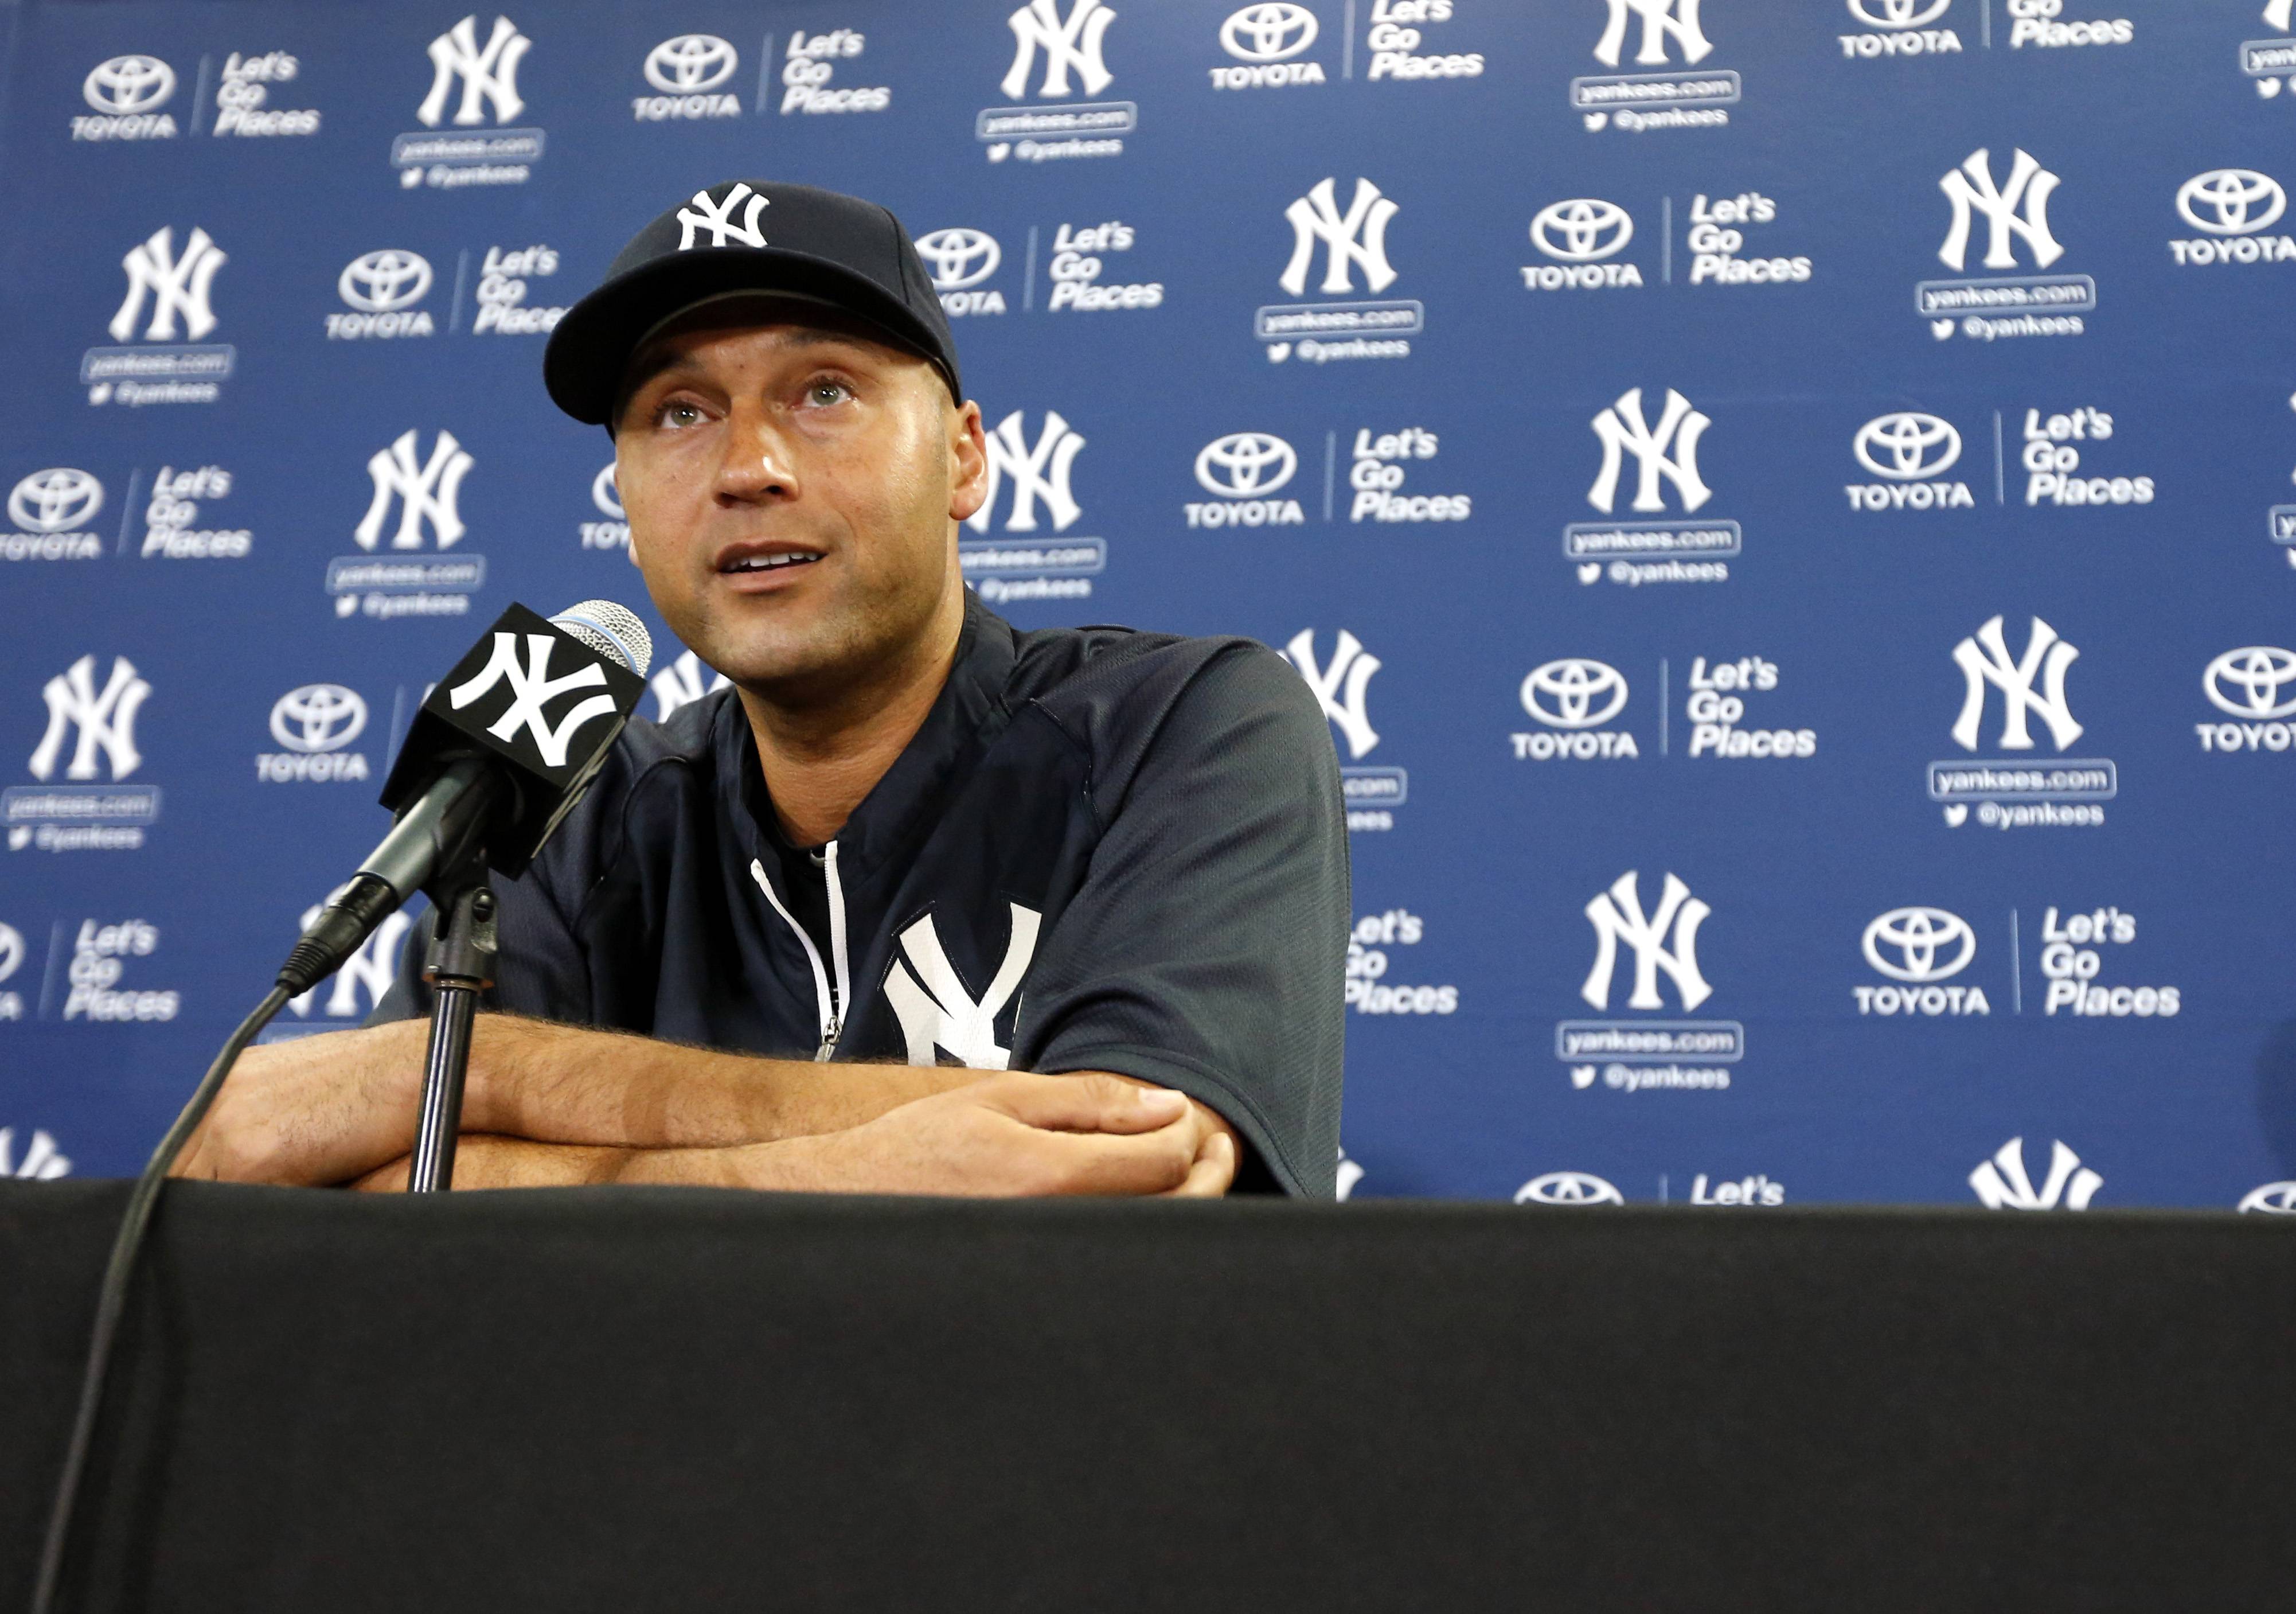 What Will Derek Jeter’s Farewell Tour Bring? - He already has one for the thumb, so in his final season as a pro Derek Jeter is trying to get one for the road. We bared witness to Mariano Rivera’s magical farewell tour last year. This year, it’s the New York Yankees captain’s turn to bid farewell to baseball fans across the nation. If Jeter gets the Hollywood ending, he’ll go out with a World Series win, the sixth of his illustrious career. (Photo: Mike Carlson/Getty Images)